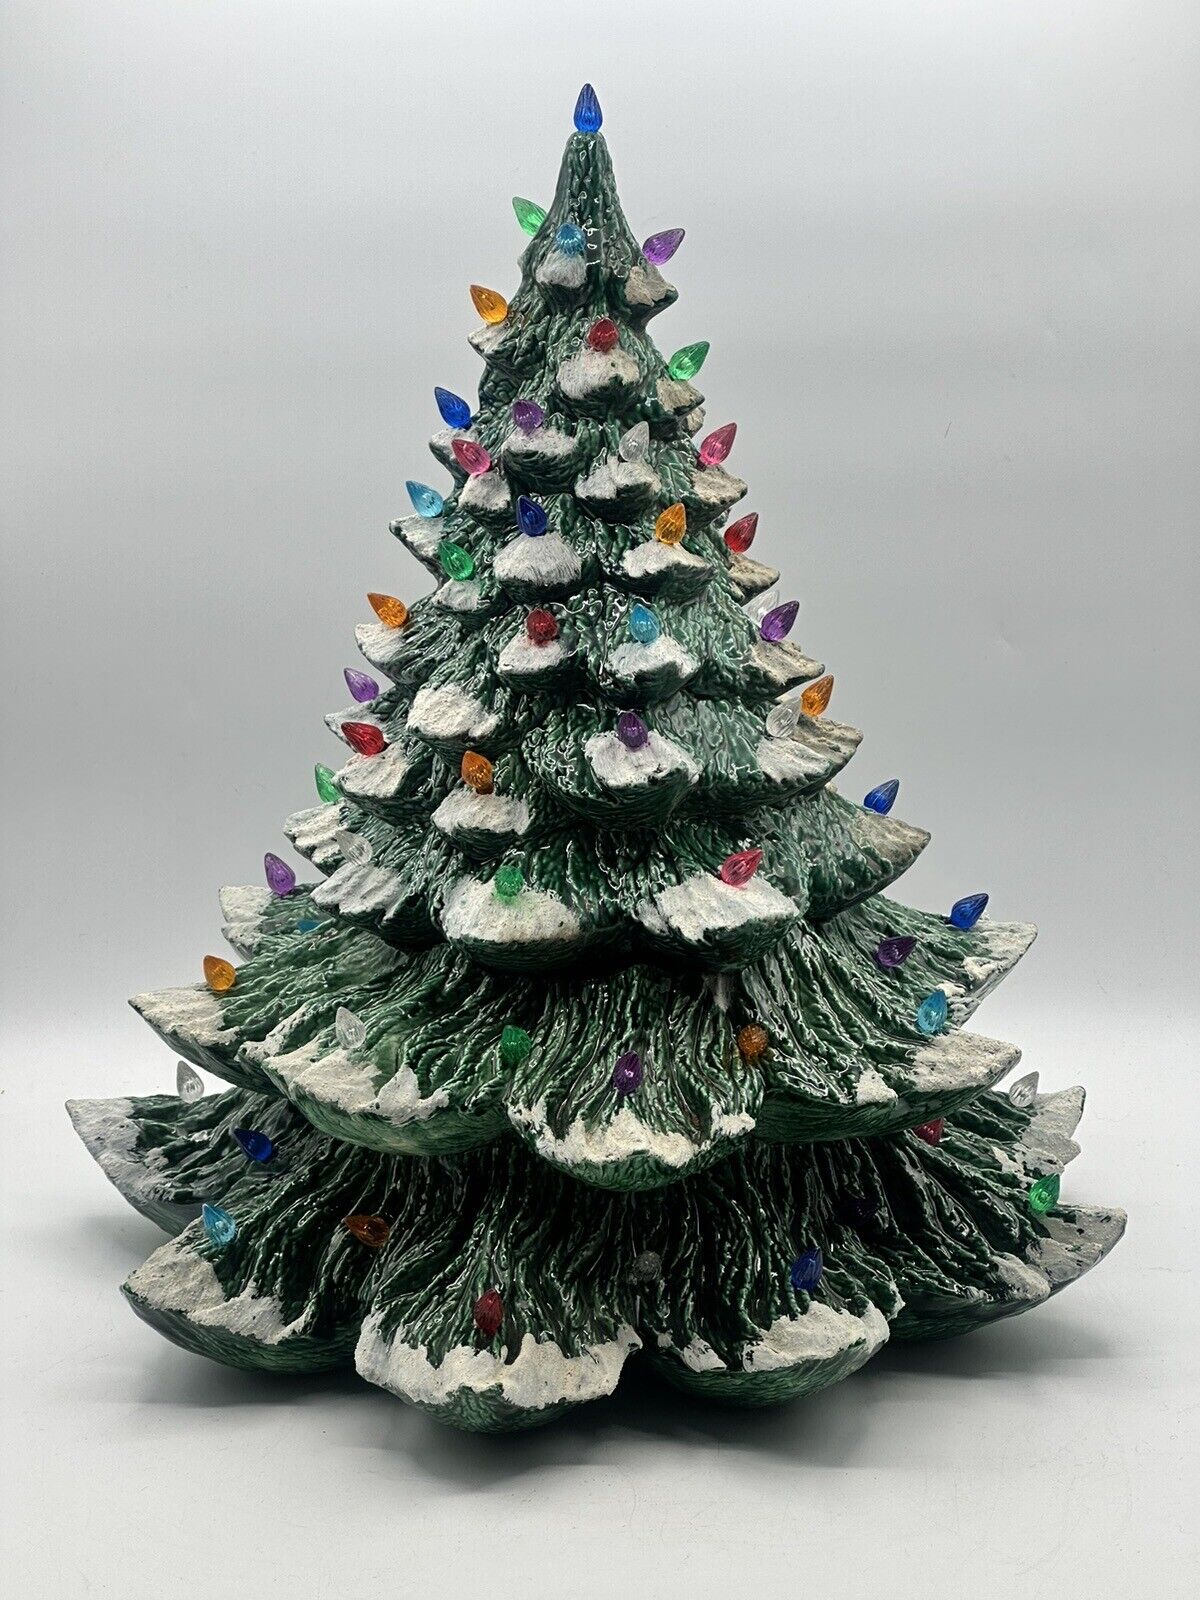 Ceramic 18” Christmas Tree By Nowell’s Molds 3 Piece No Light Base